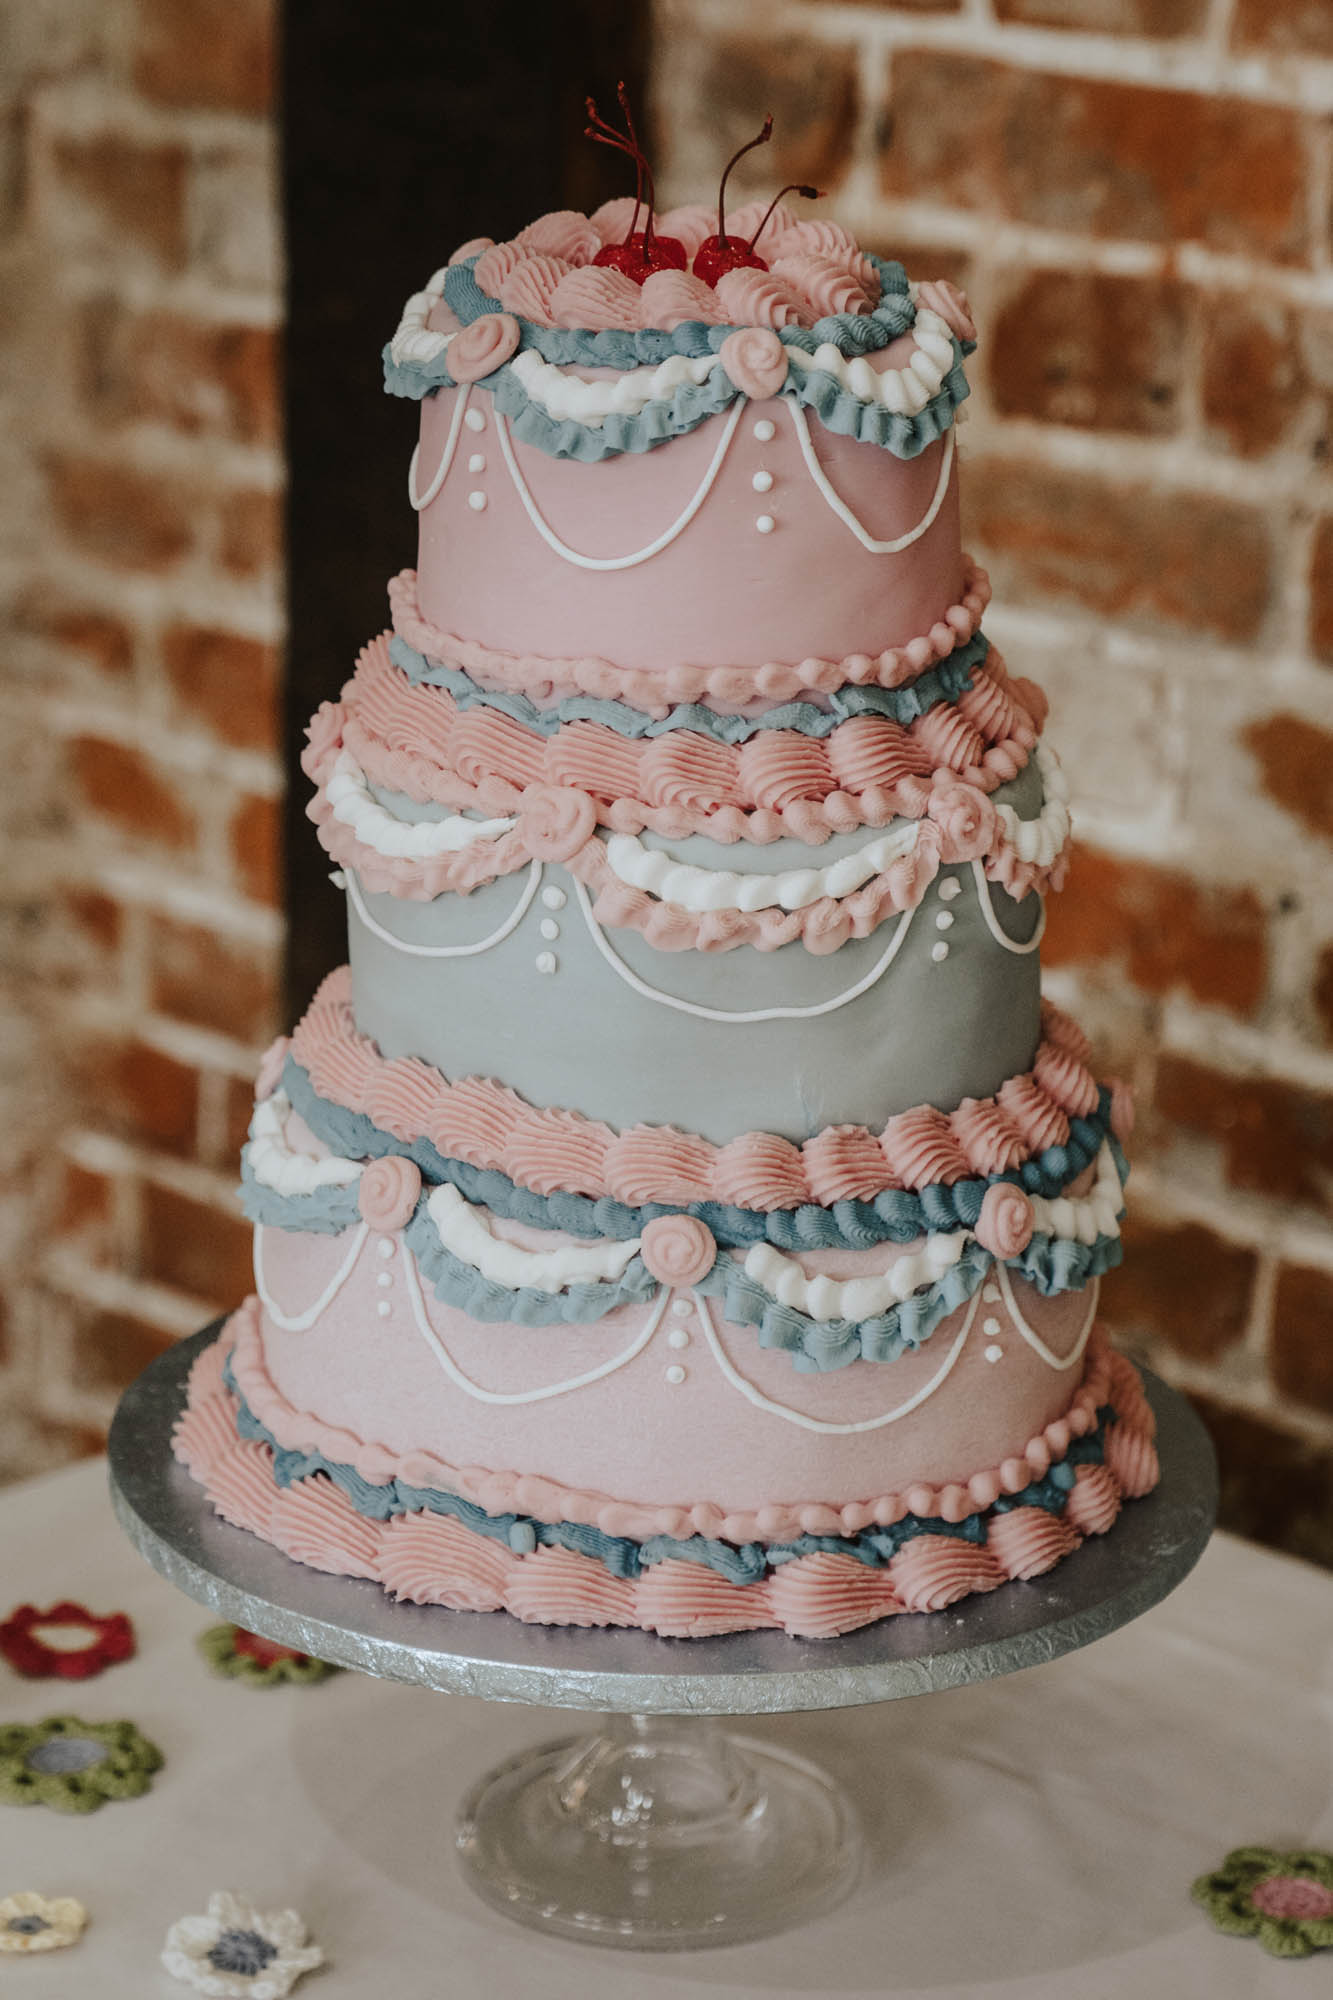 Lambeth wedding cake in pale pink and blue